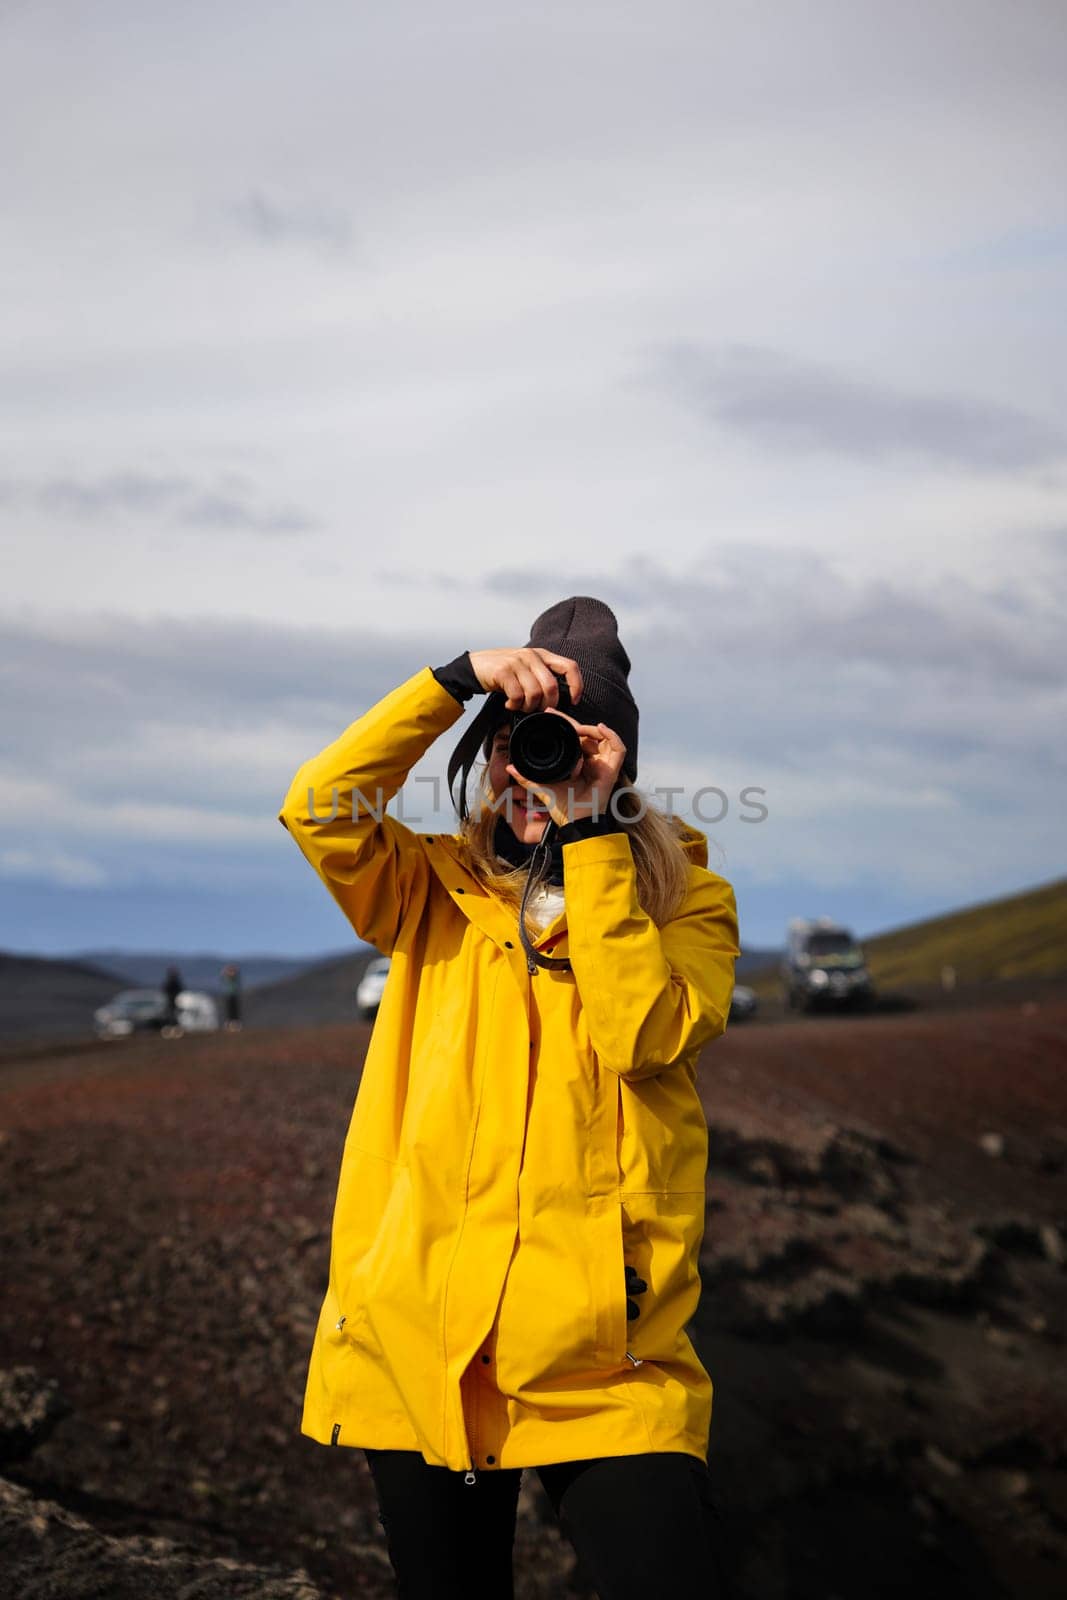 A backpacking girl taking a photo of her surroundings in the Icelandic highlands. She is wearing a yellow trekking jacket and faces the camera while holding her camera at eye level. Travel, outdoor, and nature photography. Blahylur lake, Iceland.